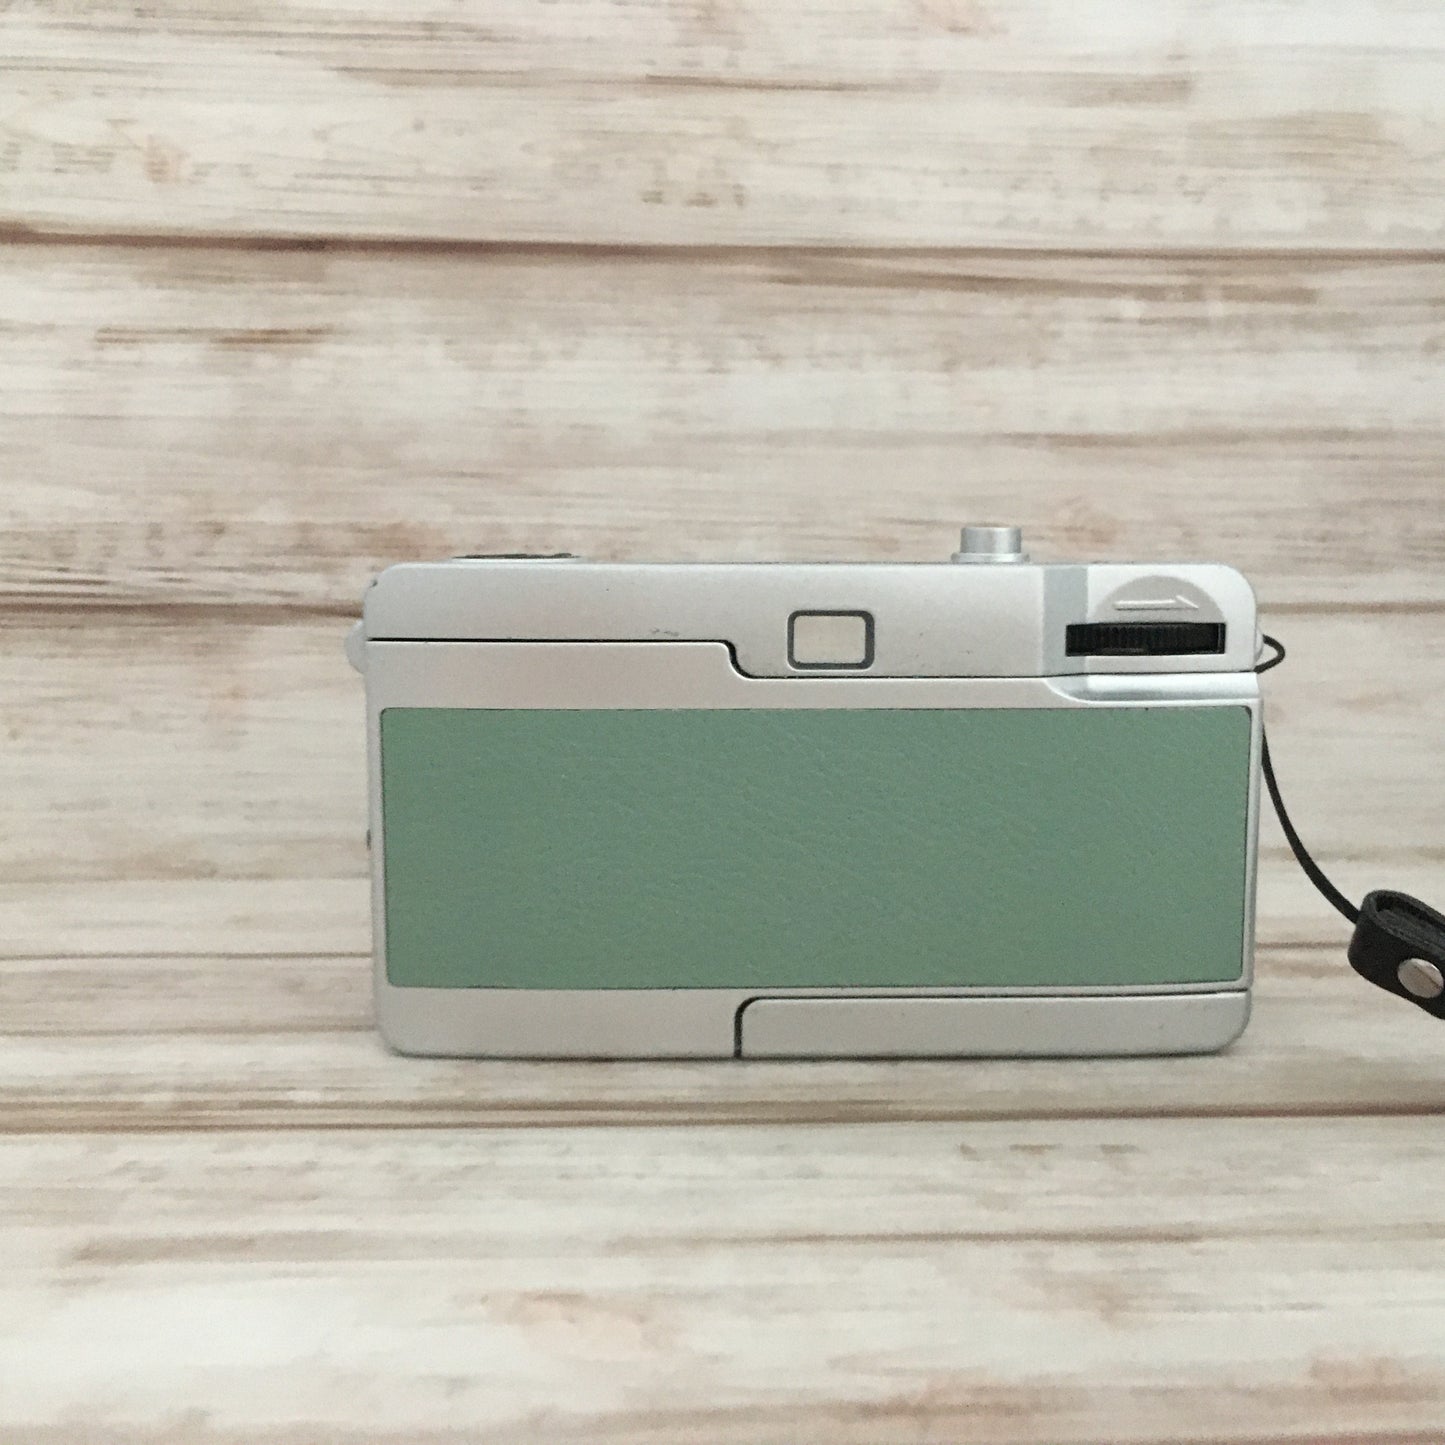 Point & shoot ! Brand new 35mm film camera with opal green leather